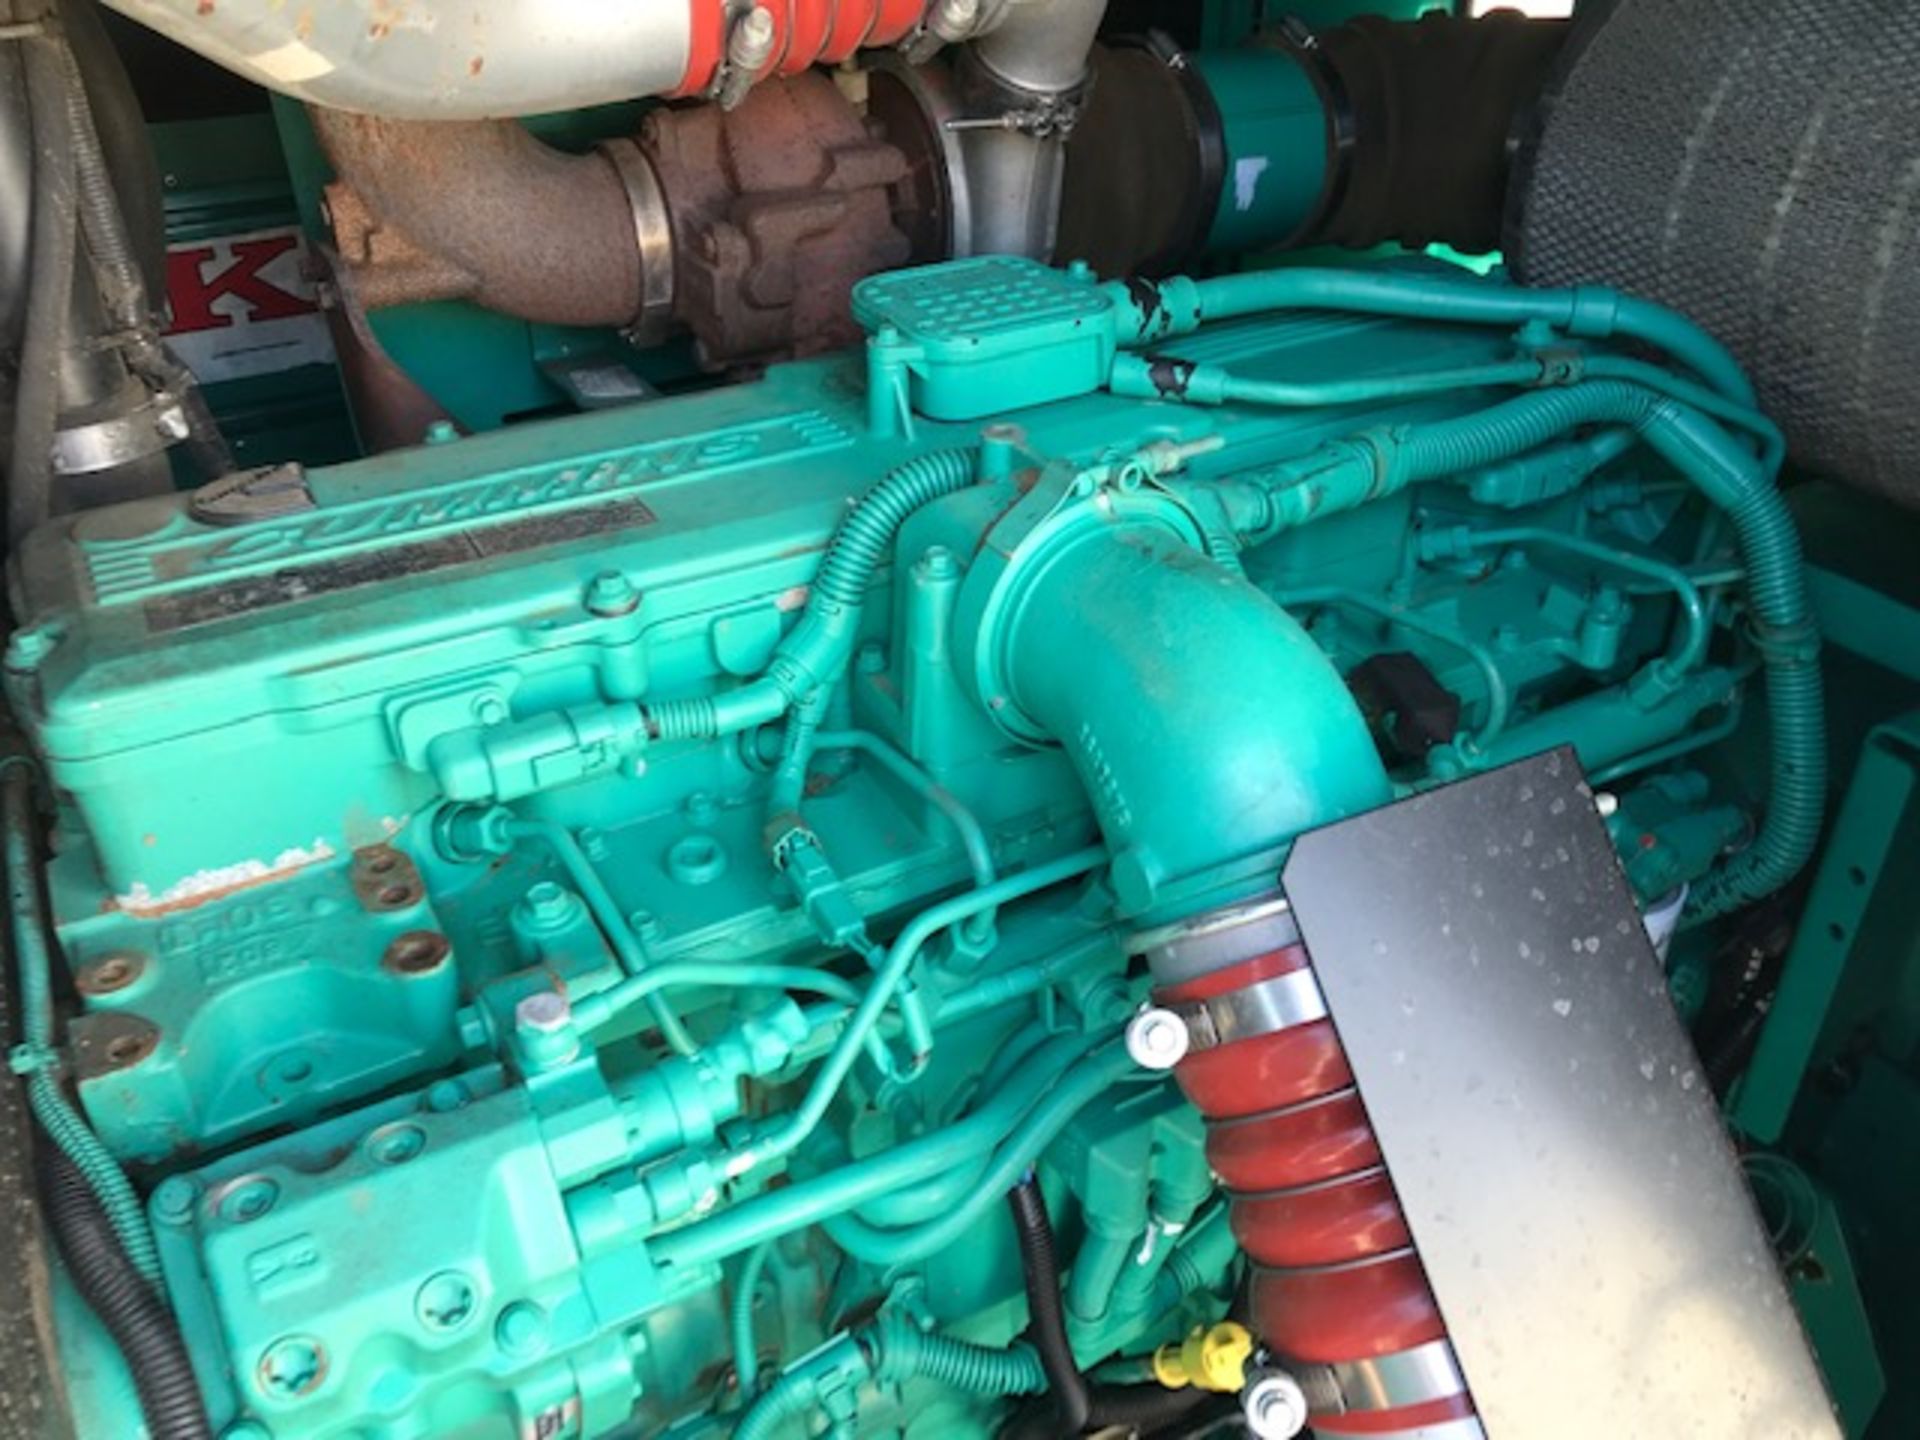 CUMMINS ENGINED 300KVA GENERATOR YEAR 2012 8367 REC HRS. DIRECT FROM LOCAL COMPANY AFTER UPGRADING - Image 11 of 14